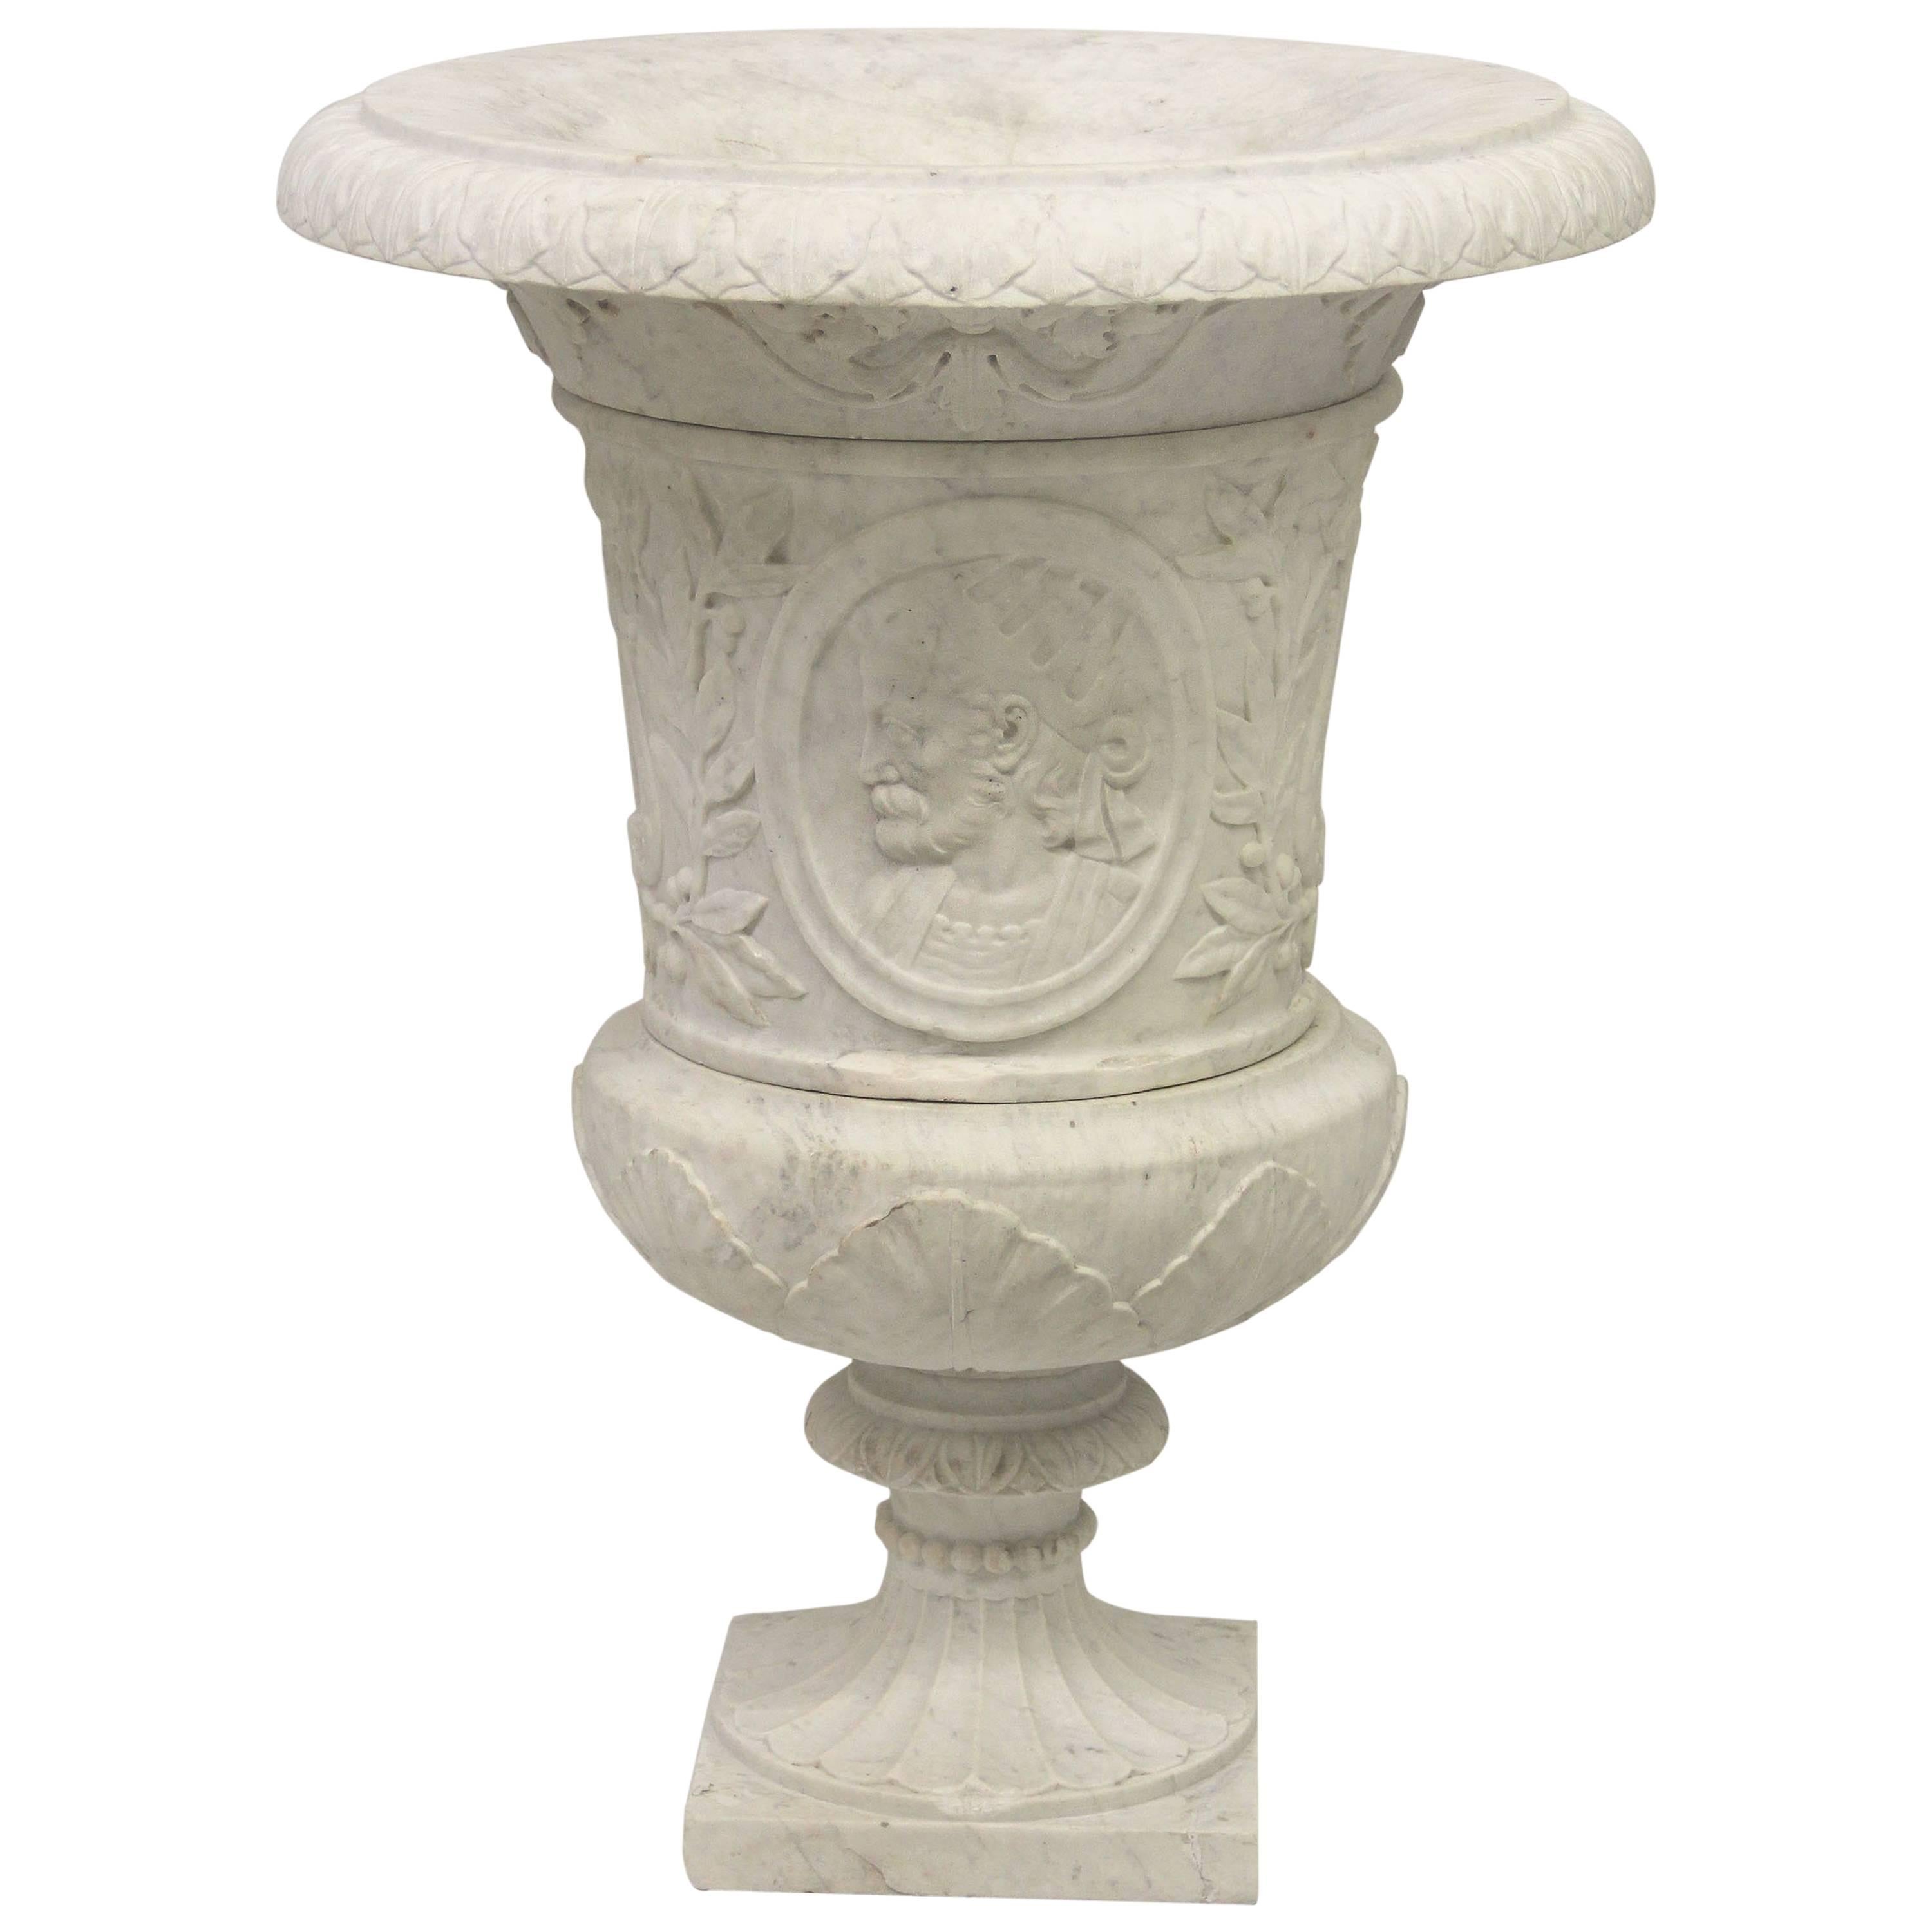 Very Fine Early 20th Century Hand-Carved Carrera Marble Urn For Sale